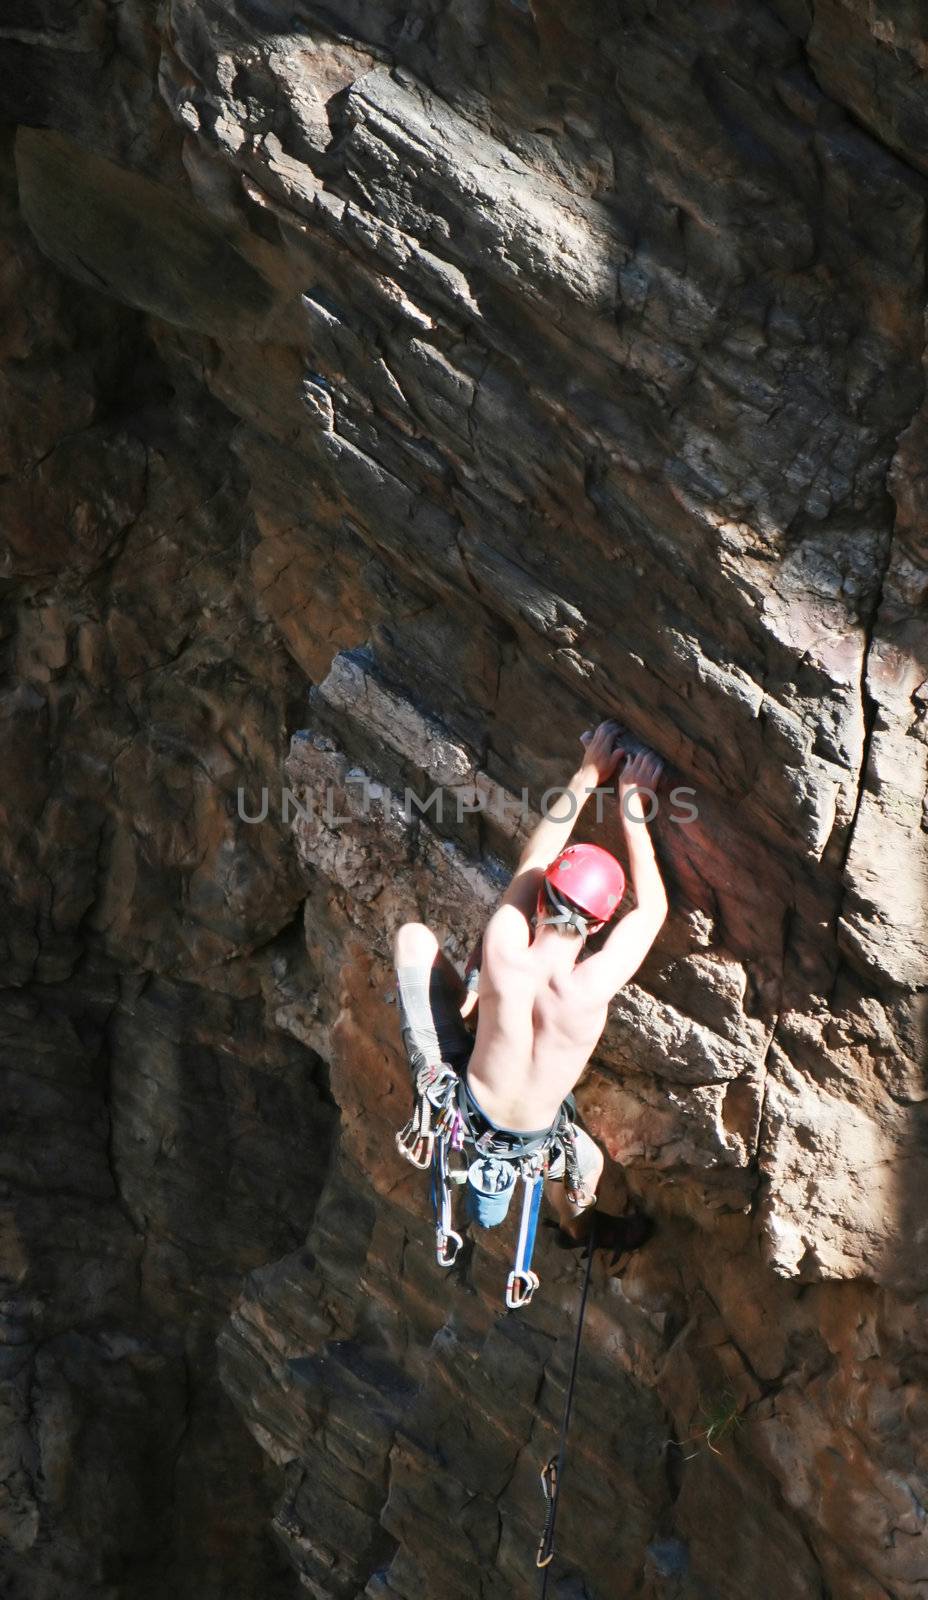 A rock climber works his way up a rock face protected by a rope clipped into bolts. He is wearing a helmet and quickdraws dangle from his harness. The route is in the desert southwest United States. Mt Lemmon, Arizona.